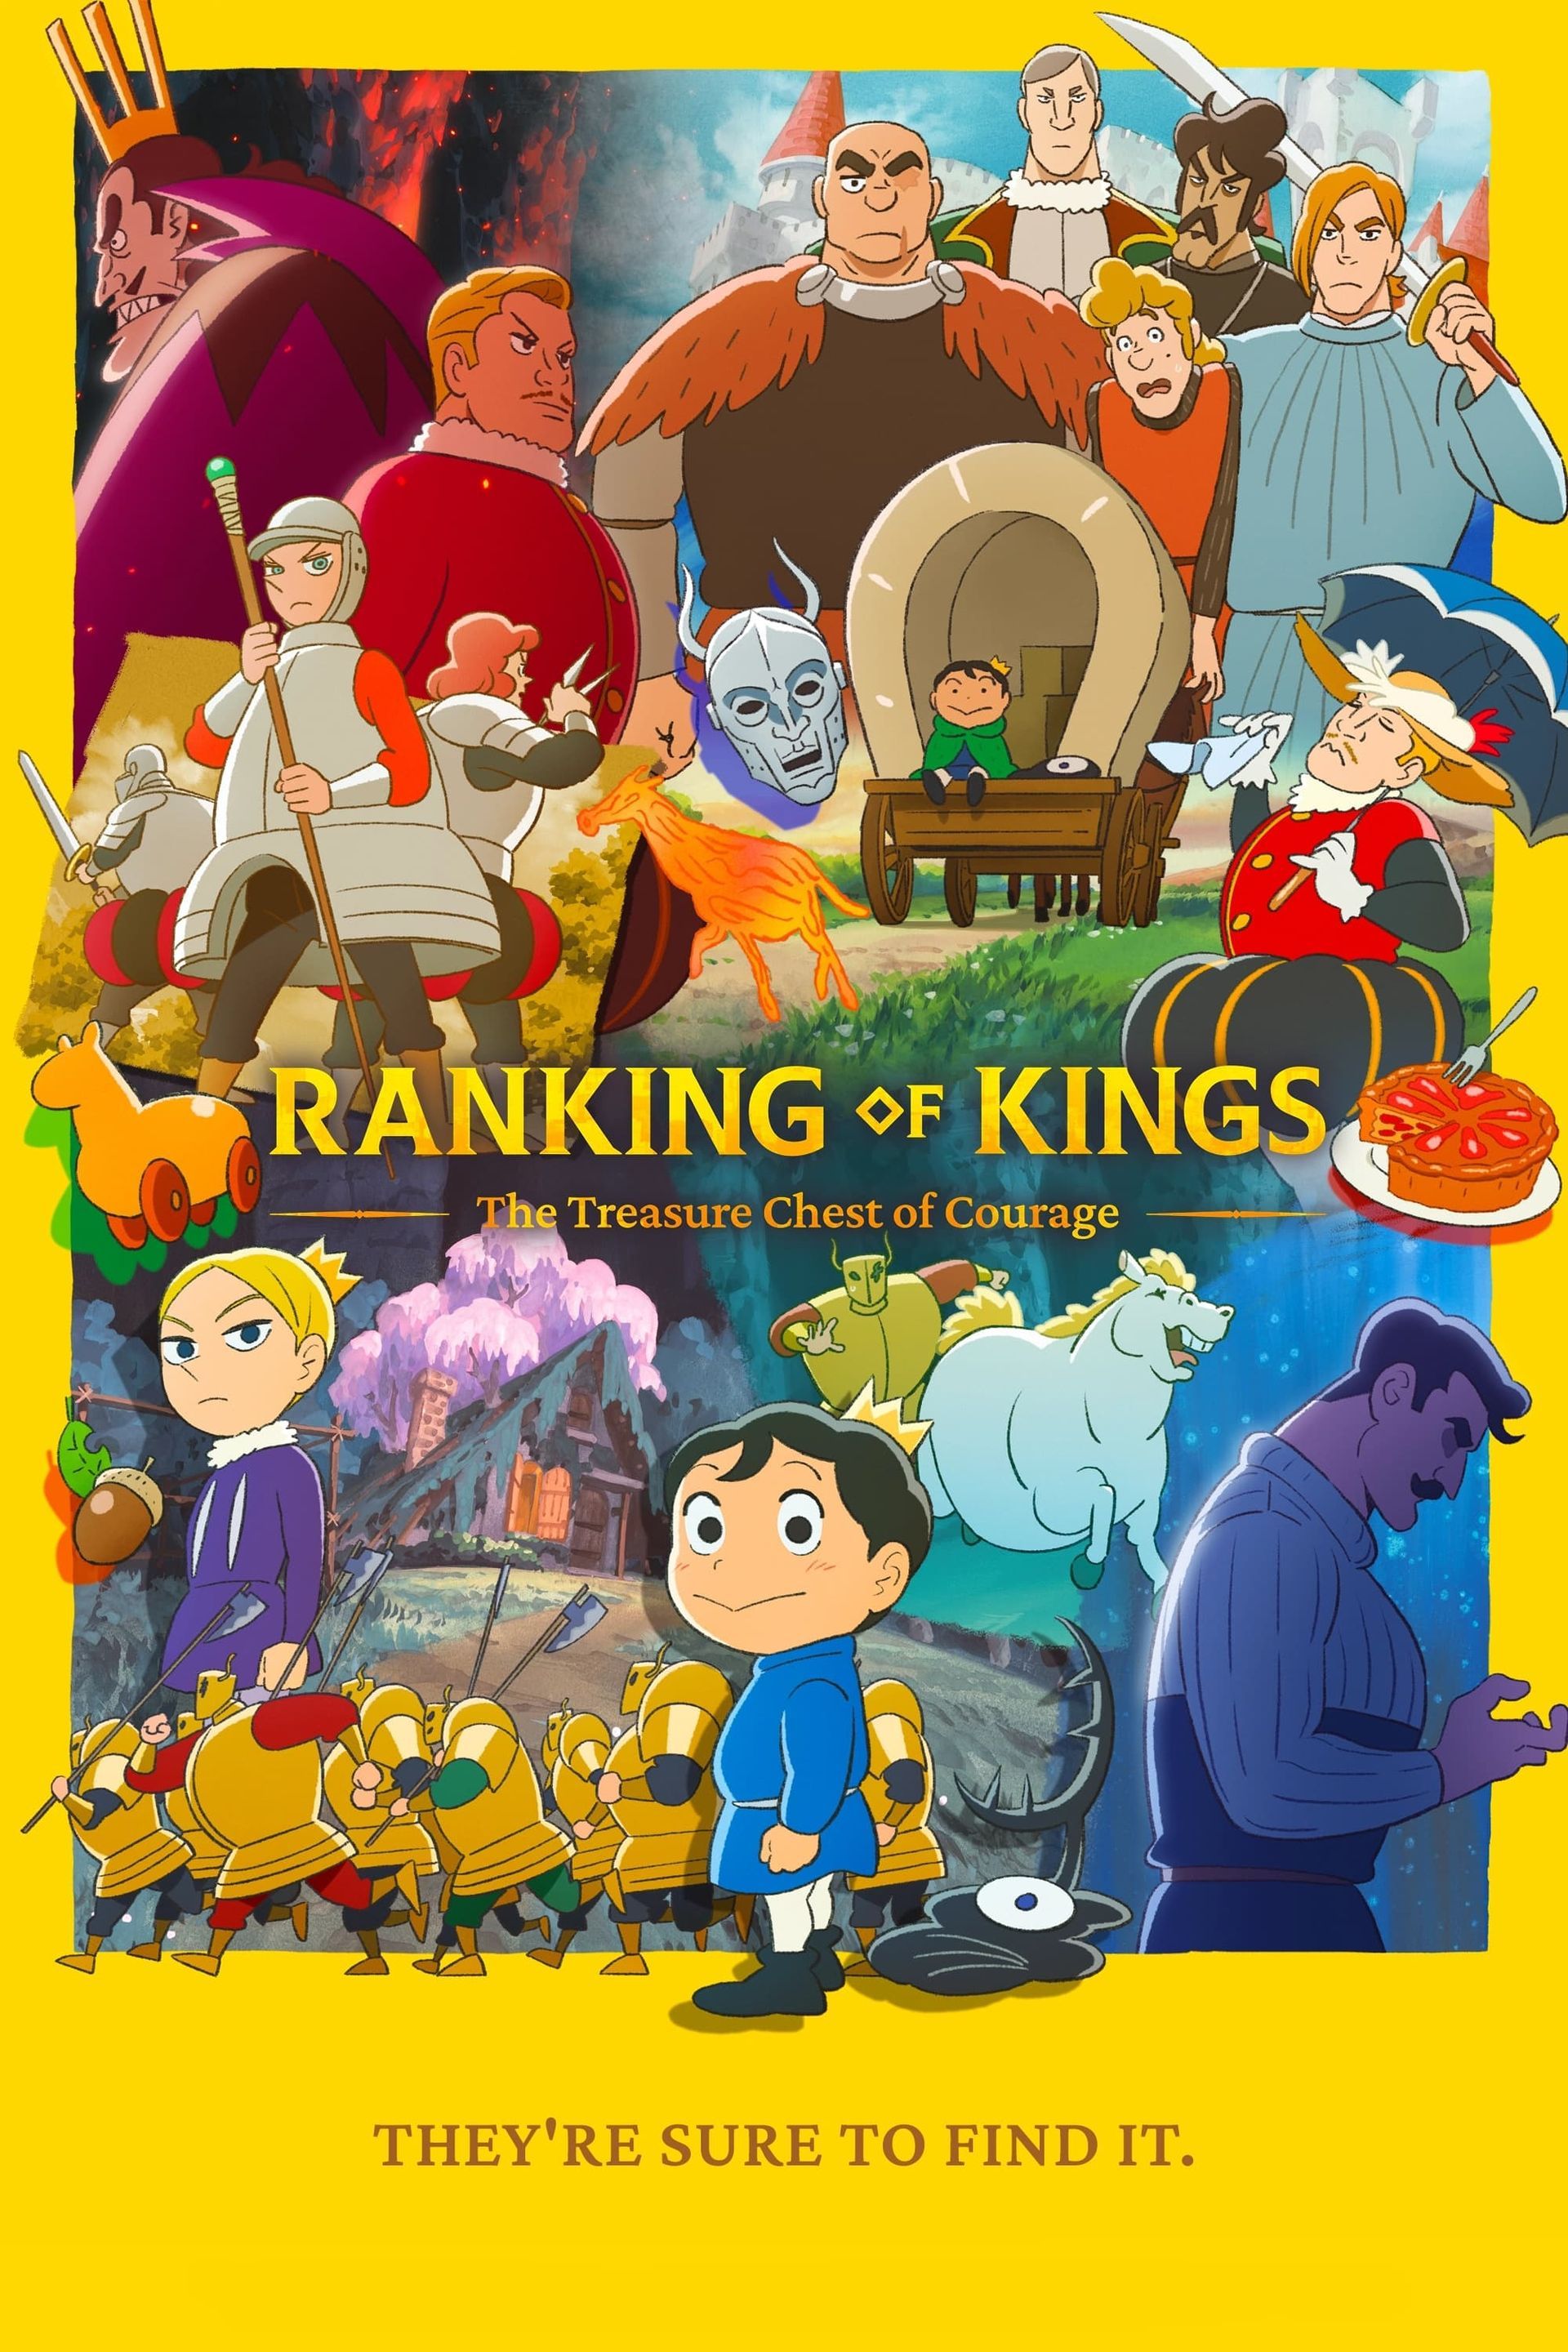 How Old is Bojji in 'Ranking of Kings'? - Culture of Gaming